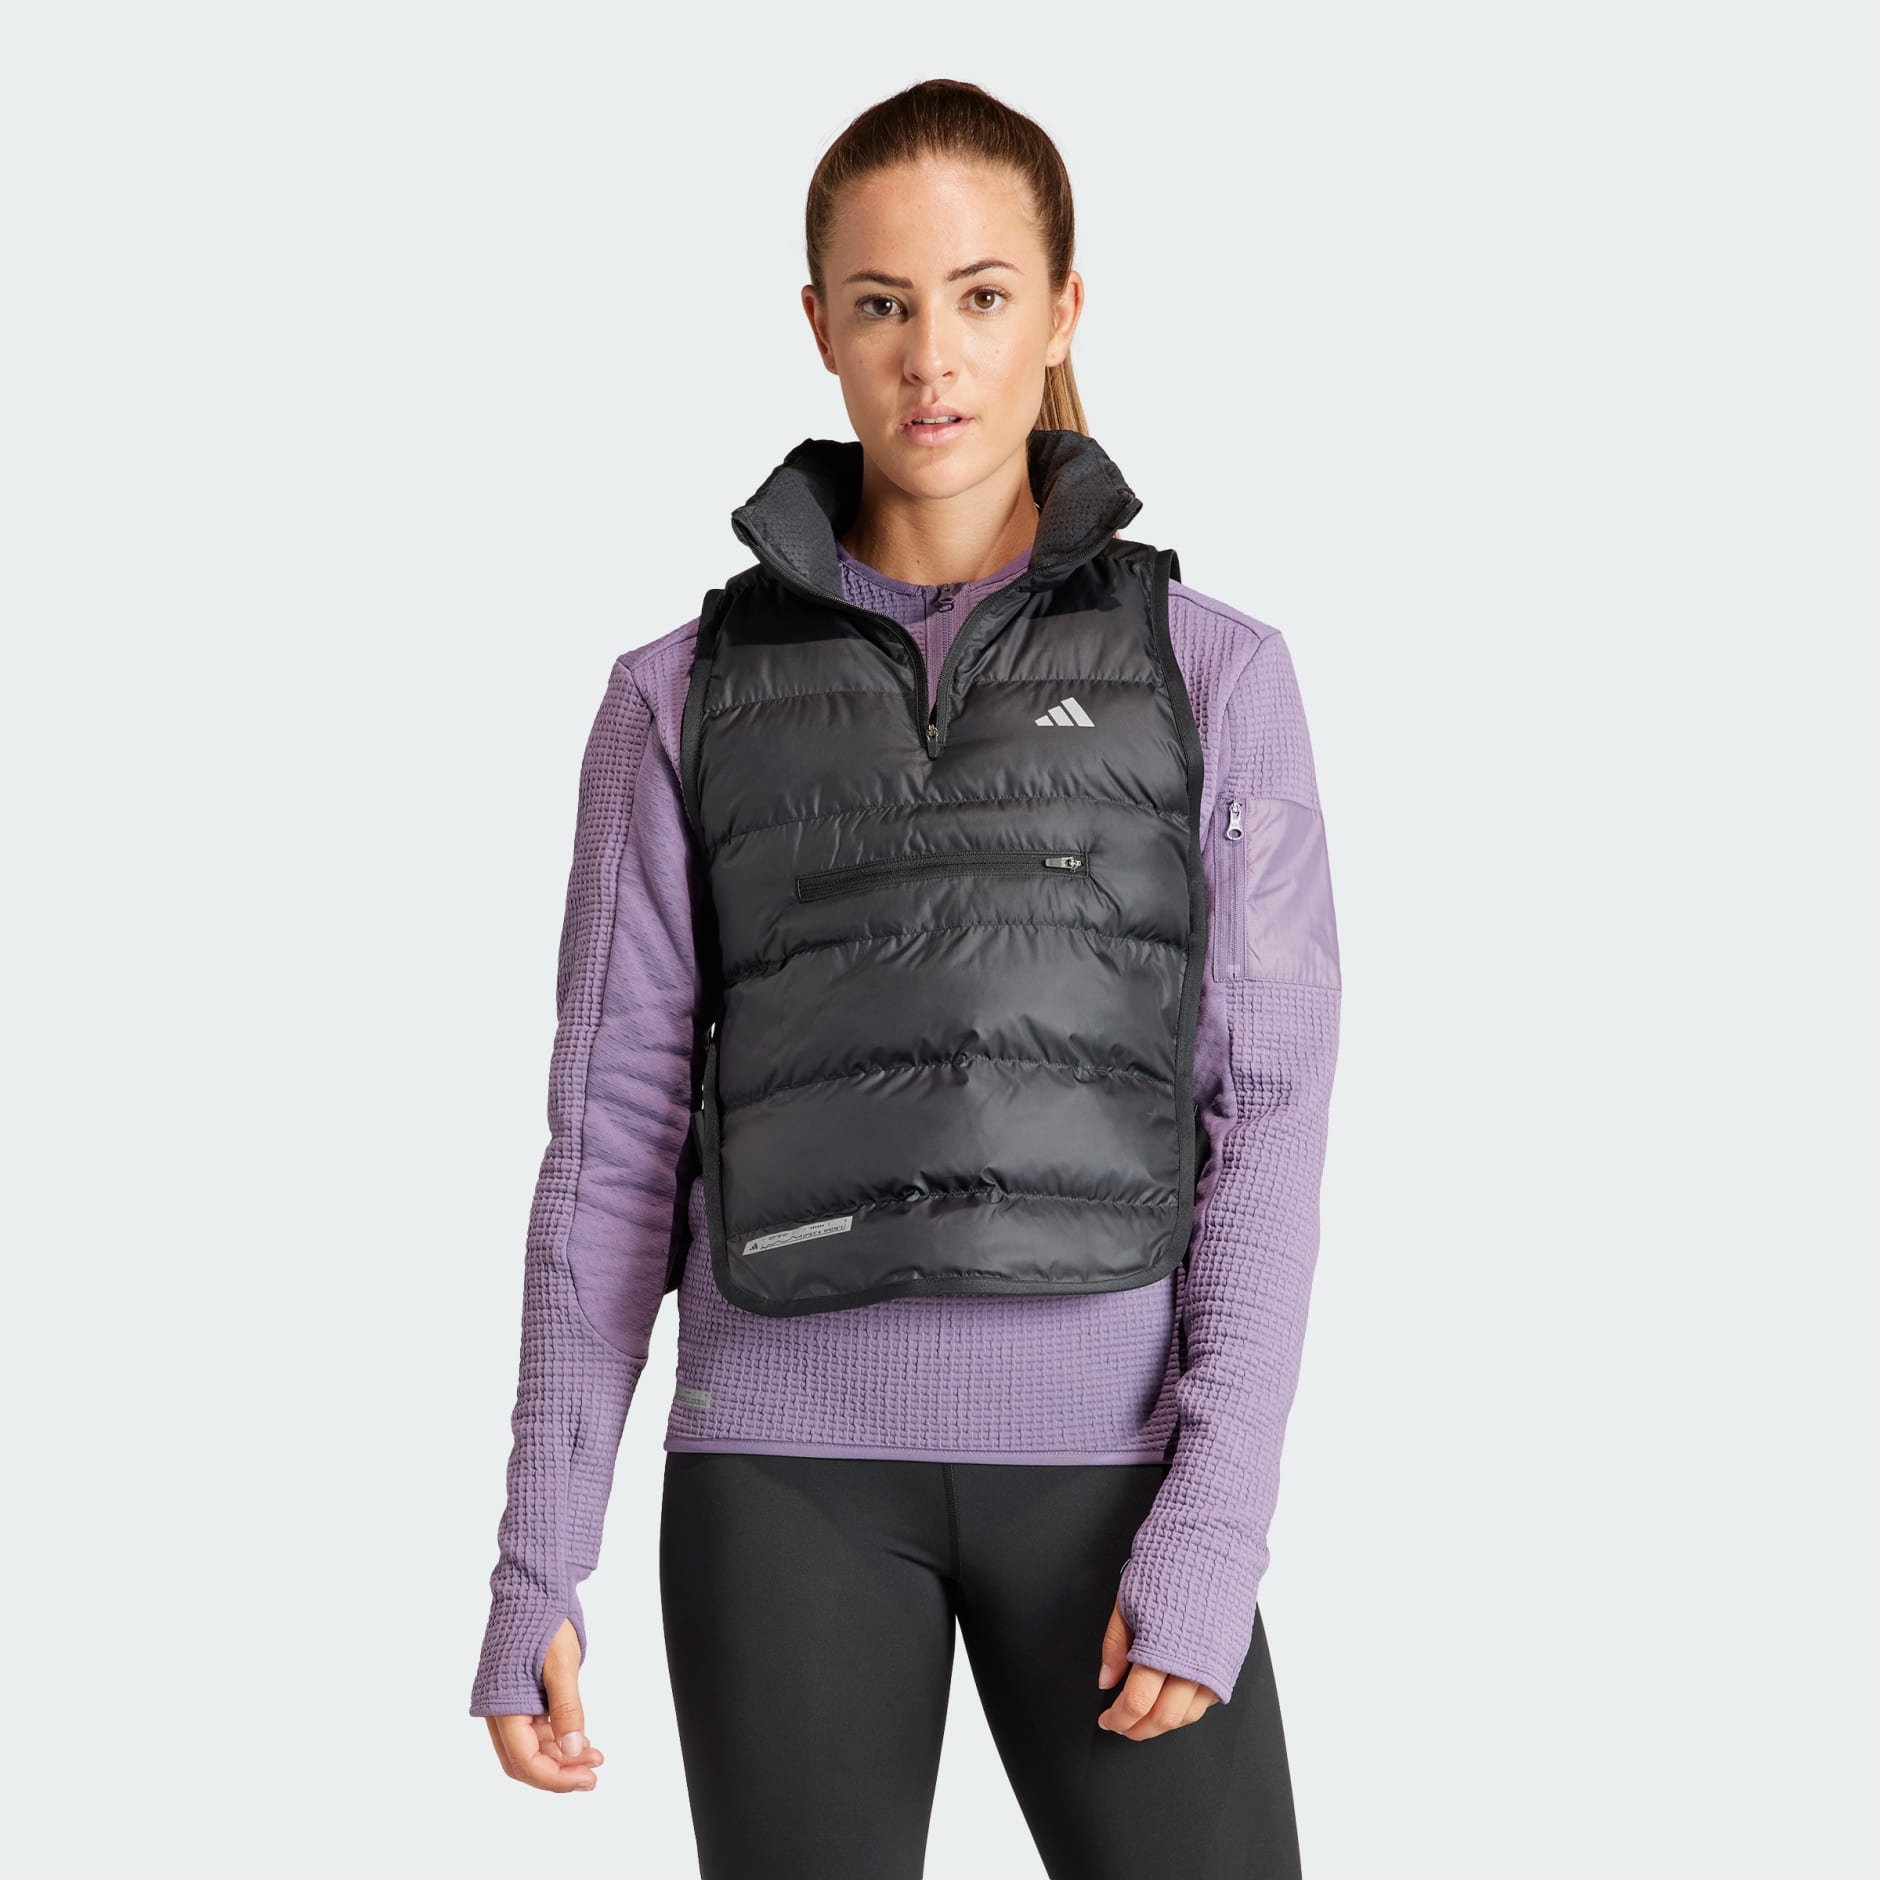 Women's Clothing - Ultimate Running Conquer the Elements Body Warmer Vest -  Black